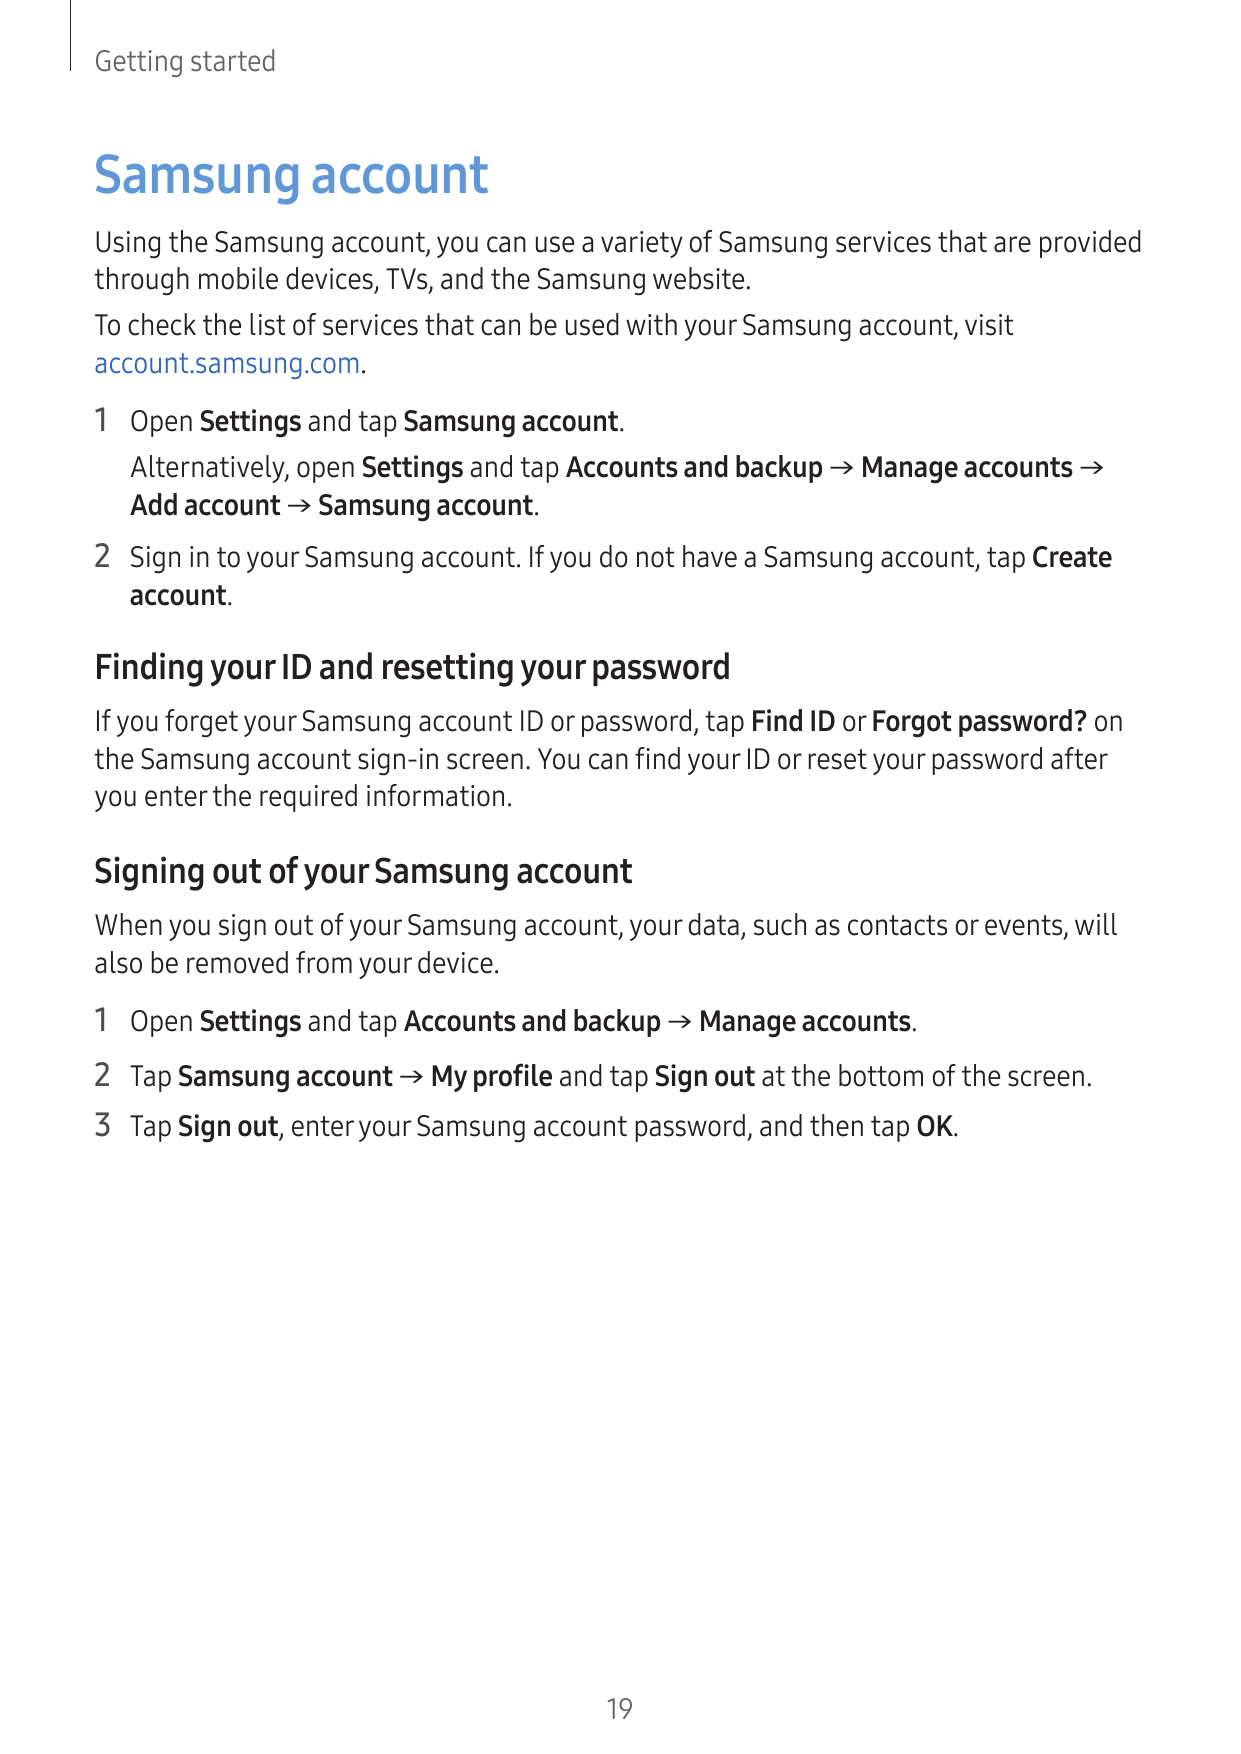 Getting startedSamsung accountUsing the Samsung account, you can use a variety of Samsung services that are providedthrough mobi